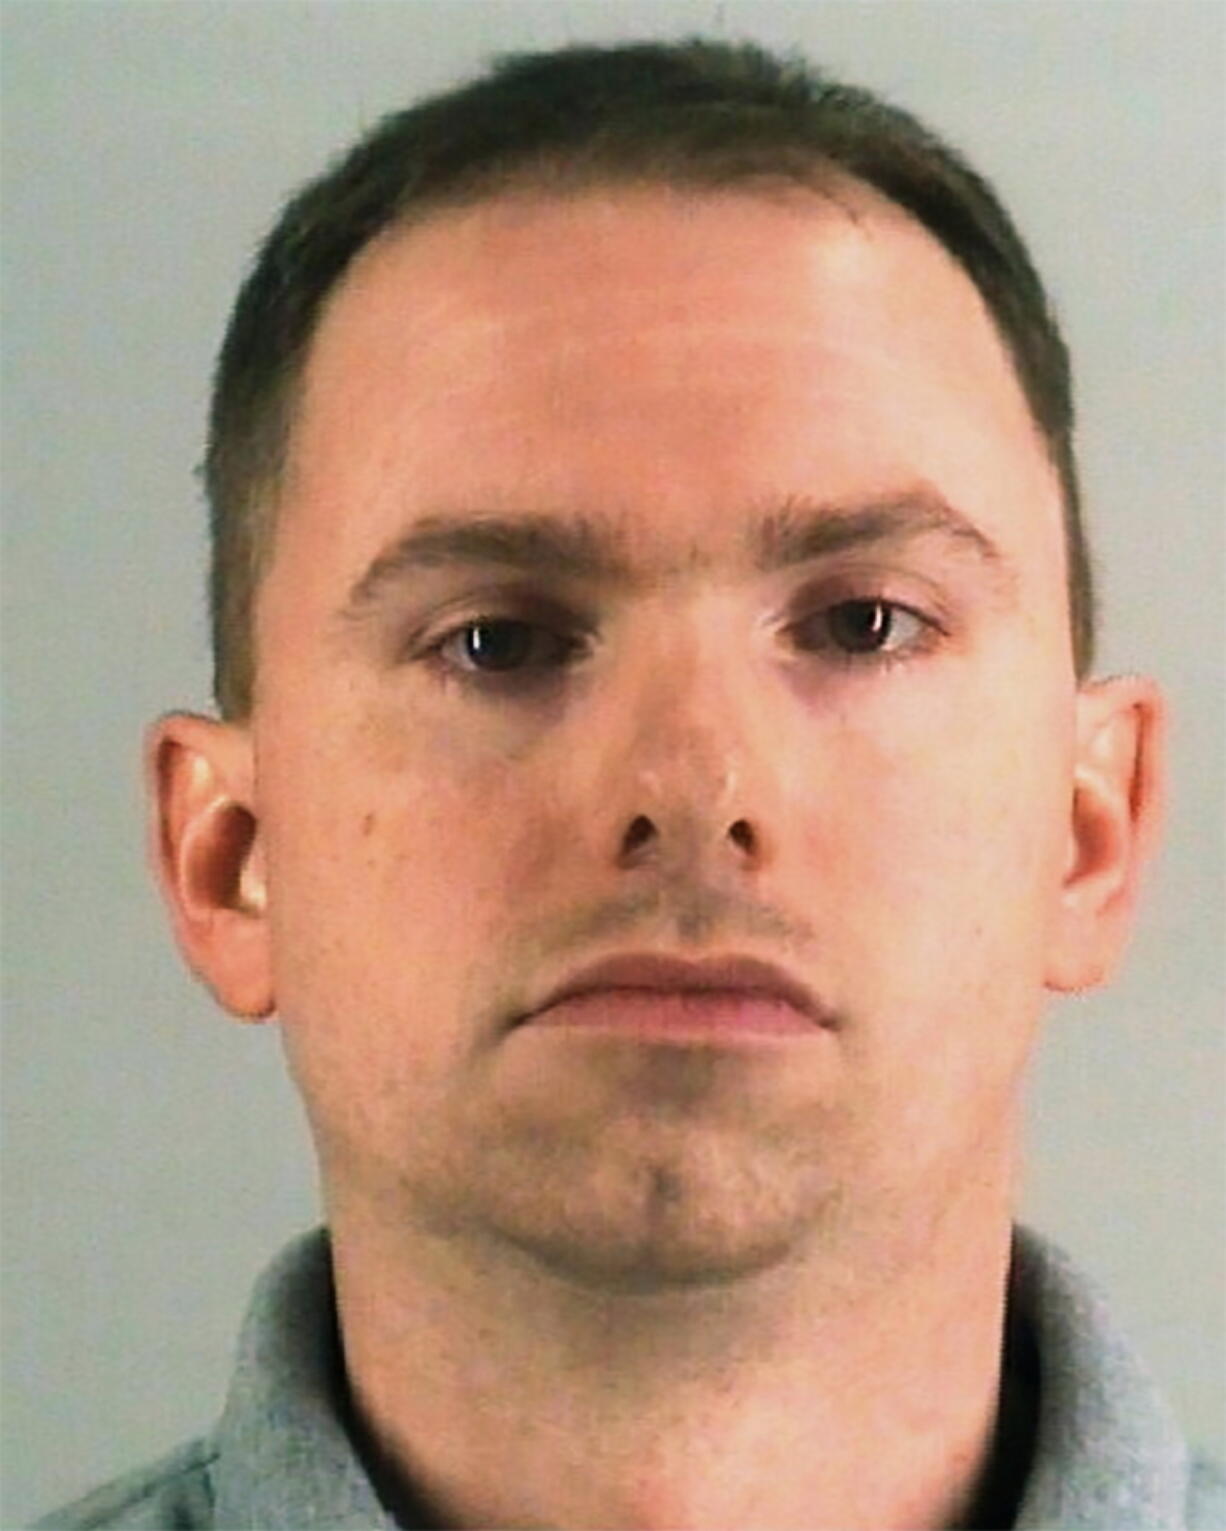 FILE - This undated photo provided by the Tarrant County, Texas, Jail shows Aaron Dean. The former Forth Worth police officer is set to go on trial Monday, Dec. 5, 2022, for shooting Atatiana Jefferson, a Black woman, through a rear window of her home while responding to a call about an open front door in 2019.